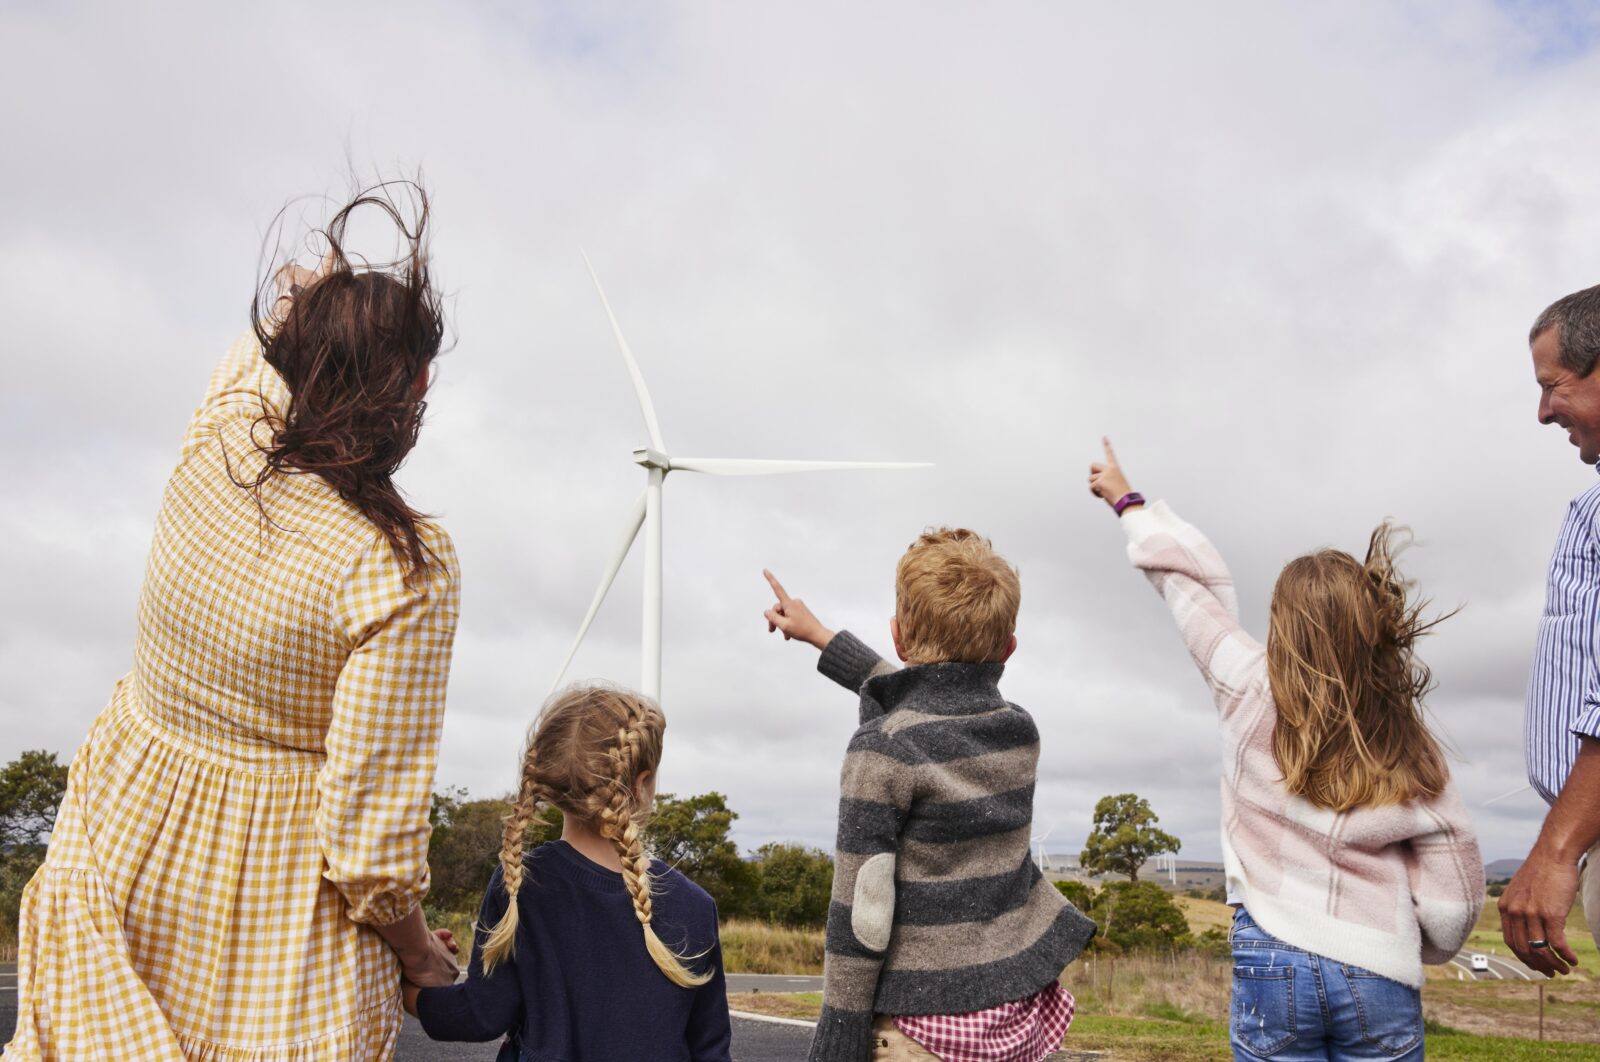 family pointing a large wind turbine